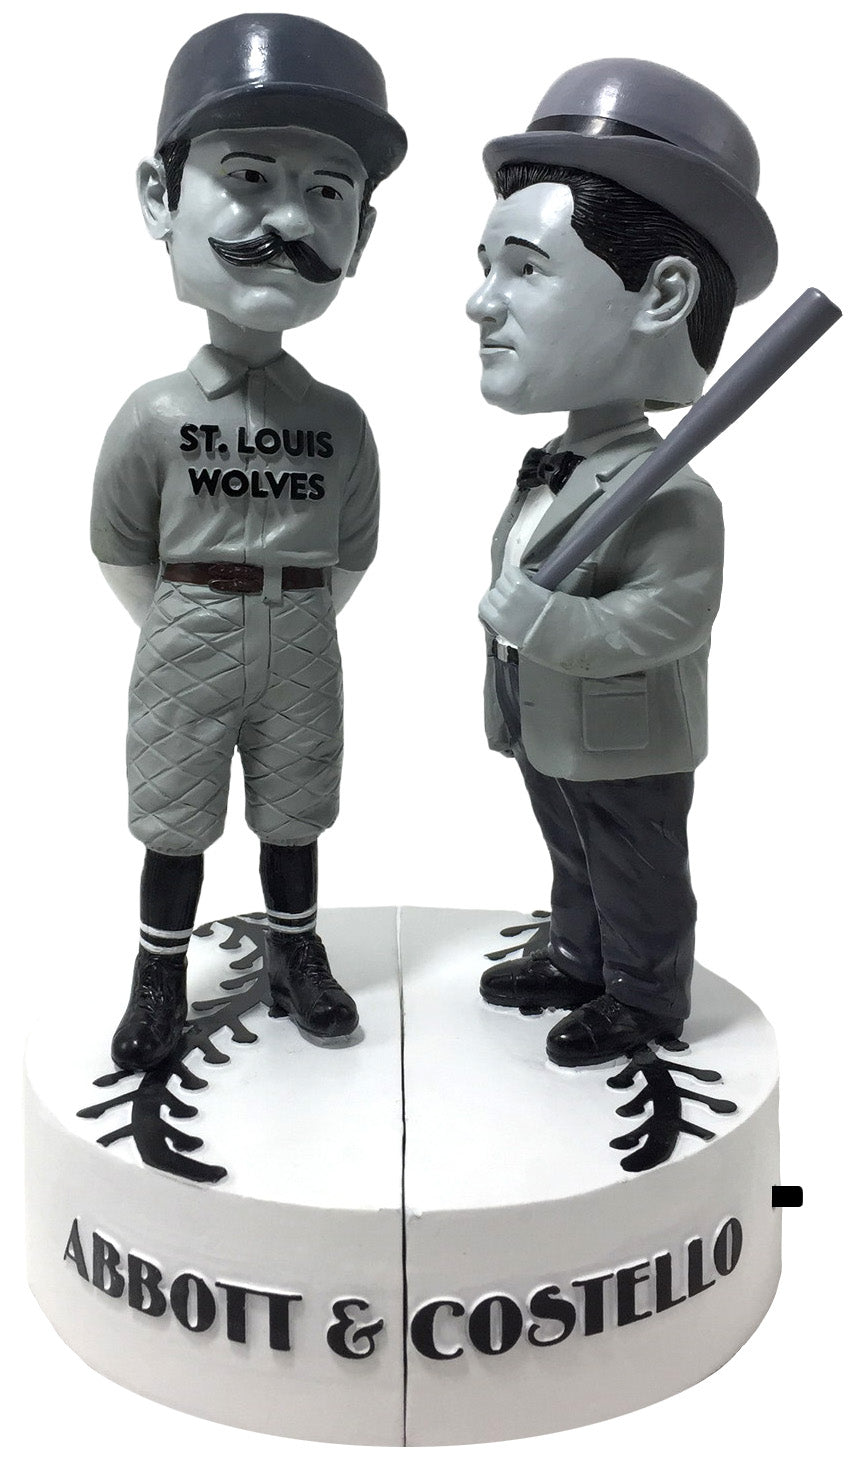 Abbott and Costello - "Who's on First?" Talking Black & White Bobblehead